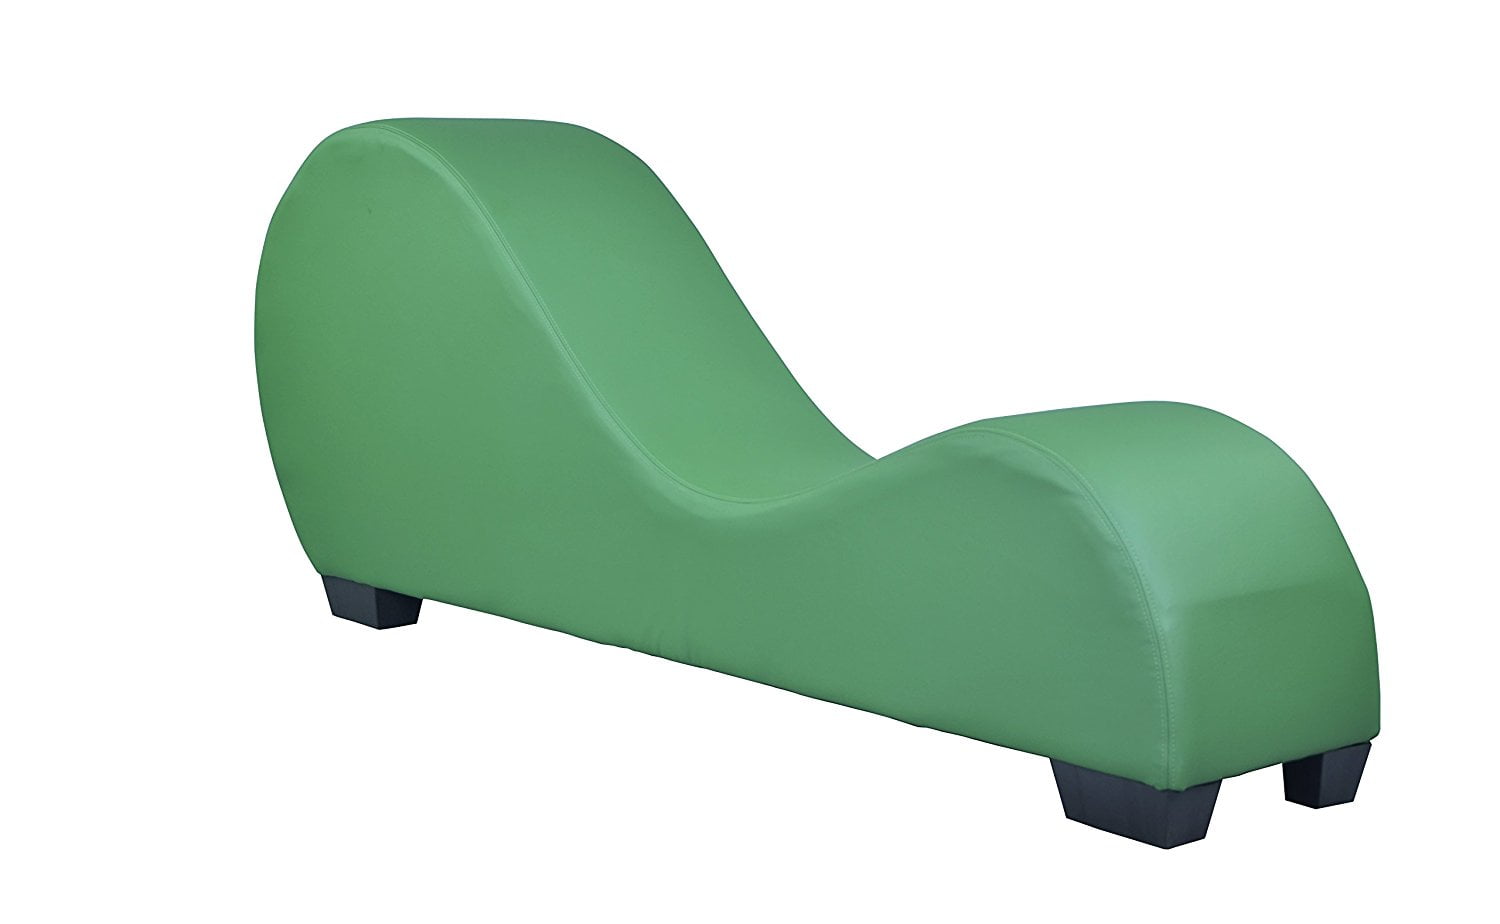 New Green Leather Yoga Chair Stretch Sofa Relax Sex Chair Love